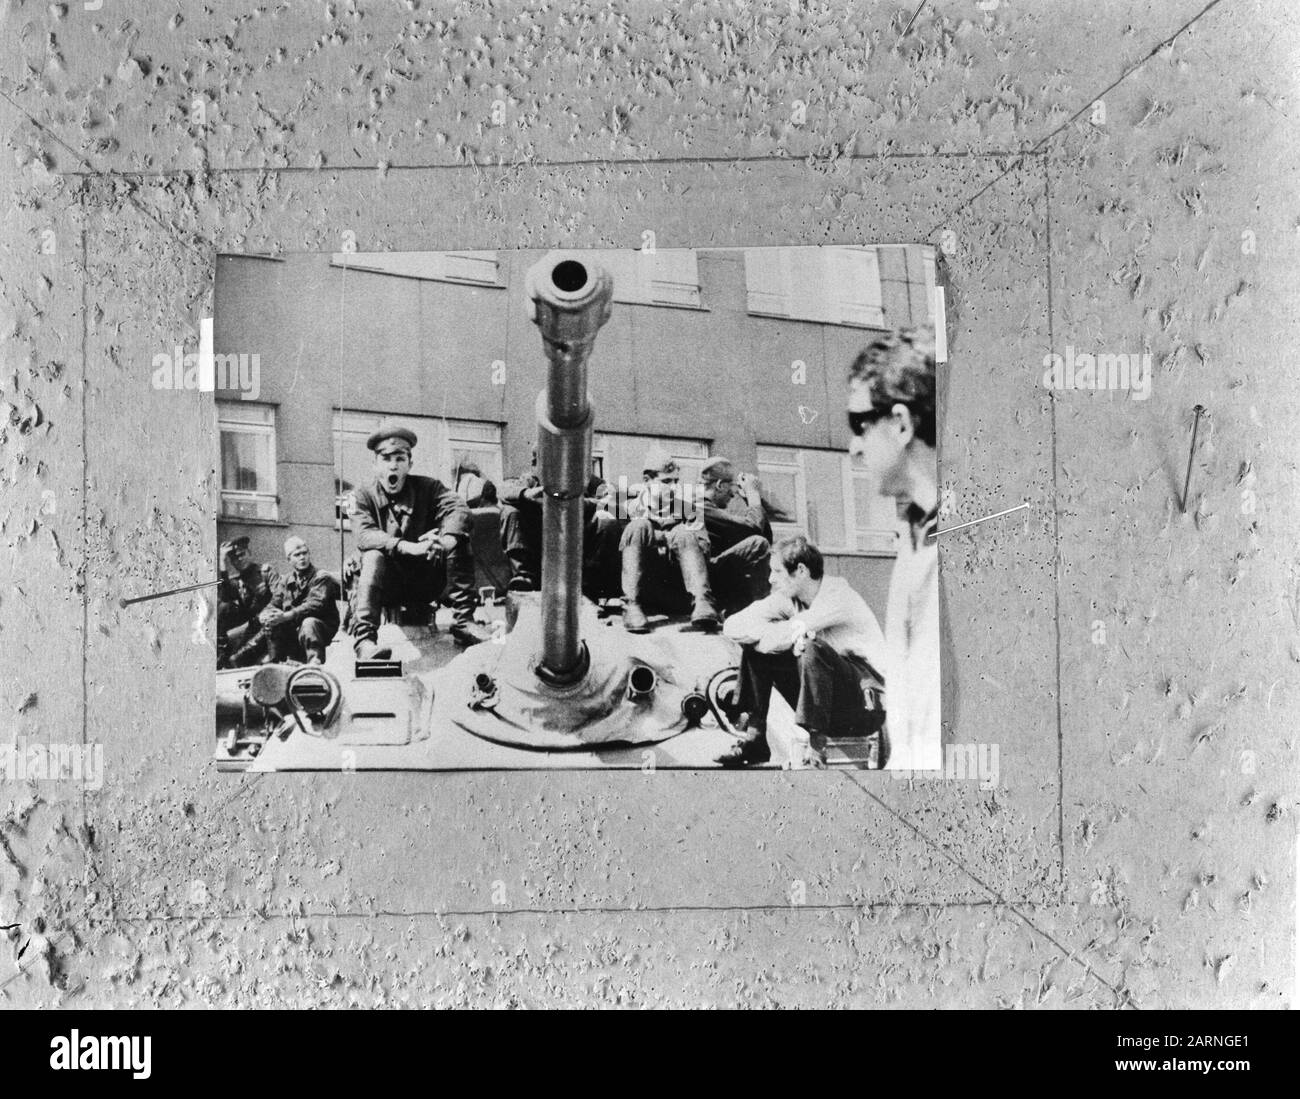 Armed Russian soldiers and civilians sitting on a tank in Prague Annotation: Repronegative Date: August 28, 1968 Location: Austria, Prague, Czech Republic, Czechoslovakia Keywords: soldiers , tanks Stock Photo